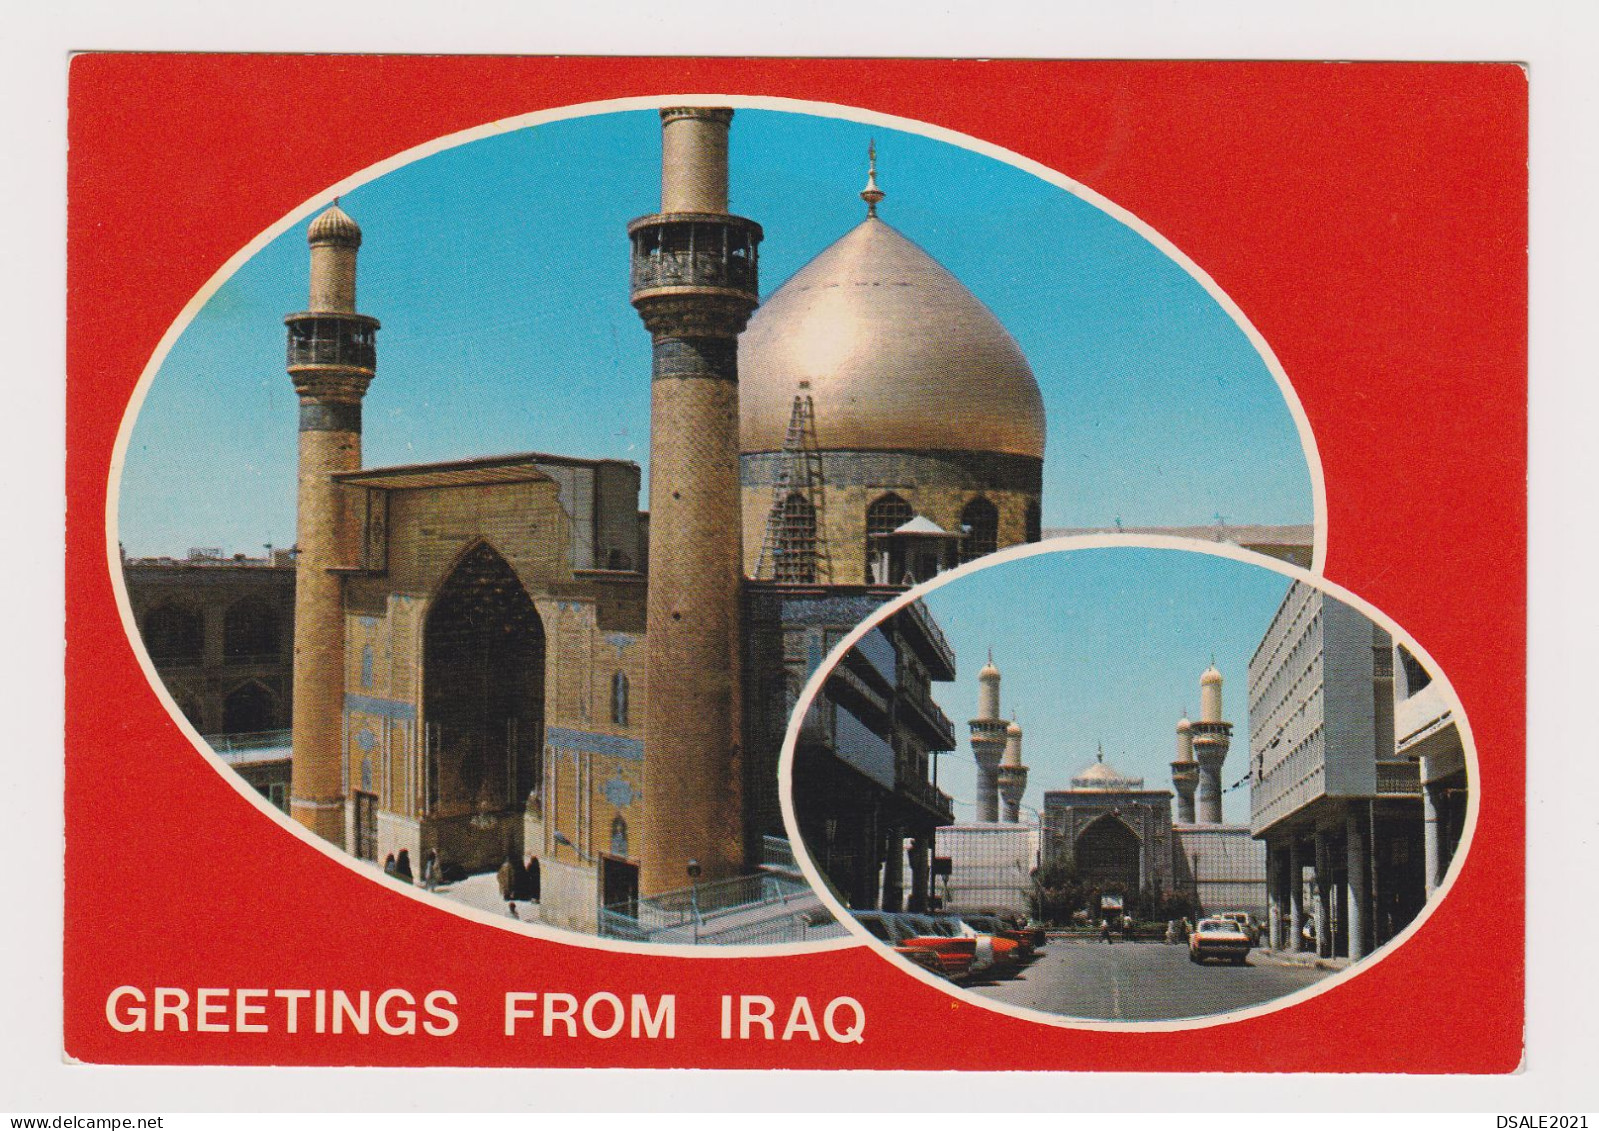 Iraq Greetings From IRAQ Mosque, Street Scene With Old Cars View Vintage Photo Postcard RPPc (64631) - Iraq